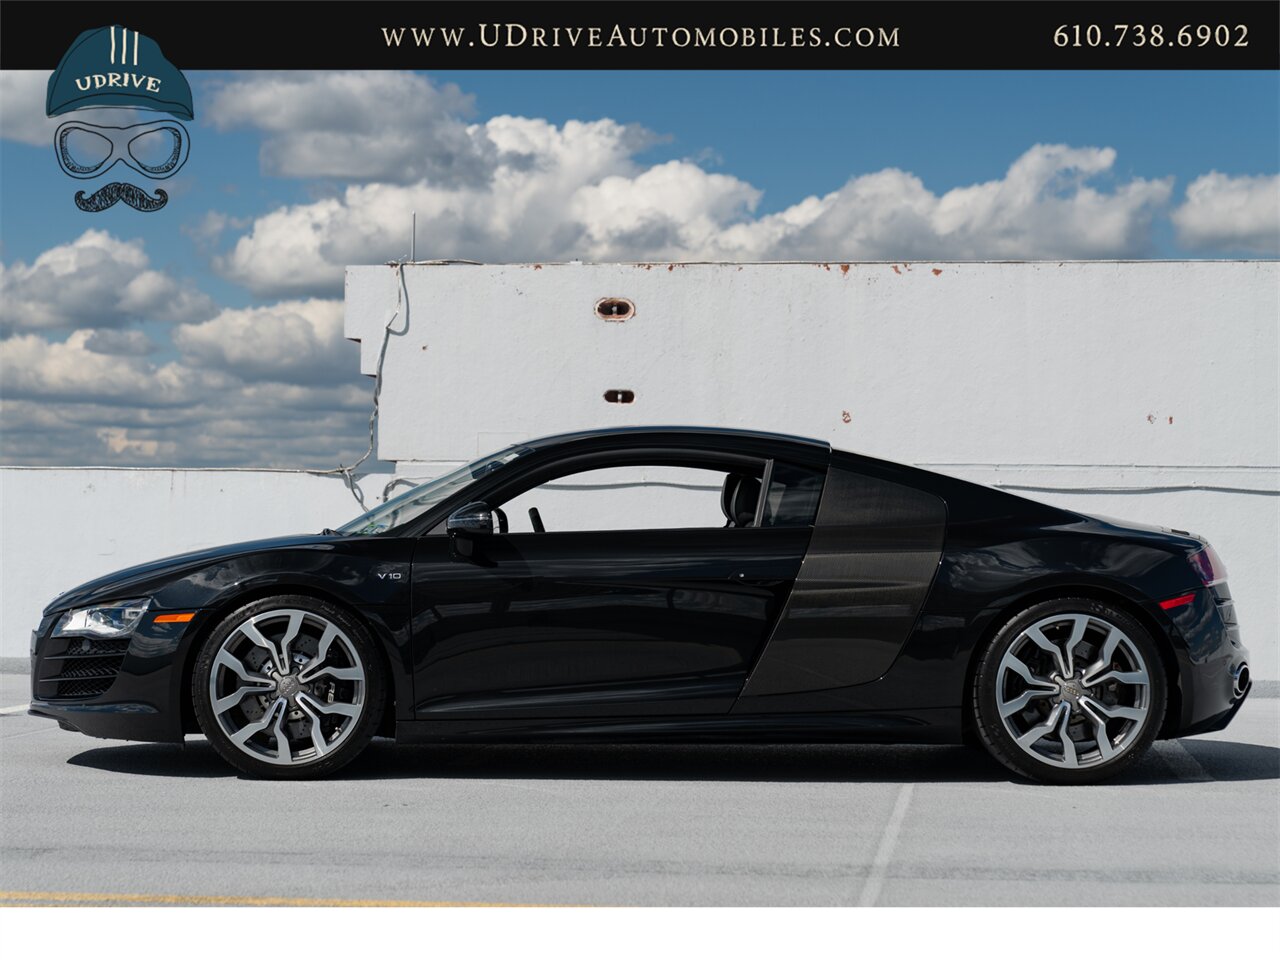 2011 Audi R8 5.2 Quattro  V10 6 Speed Manual - Photo 9 - West Chester, PA 19382